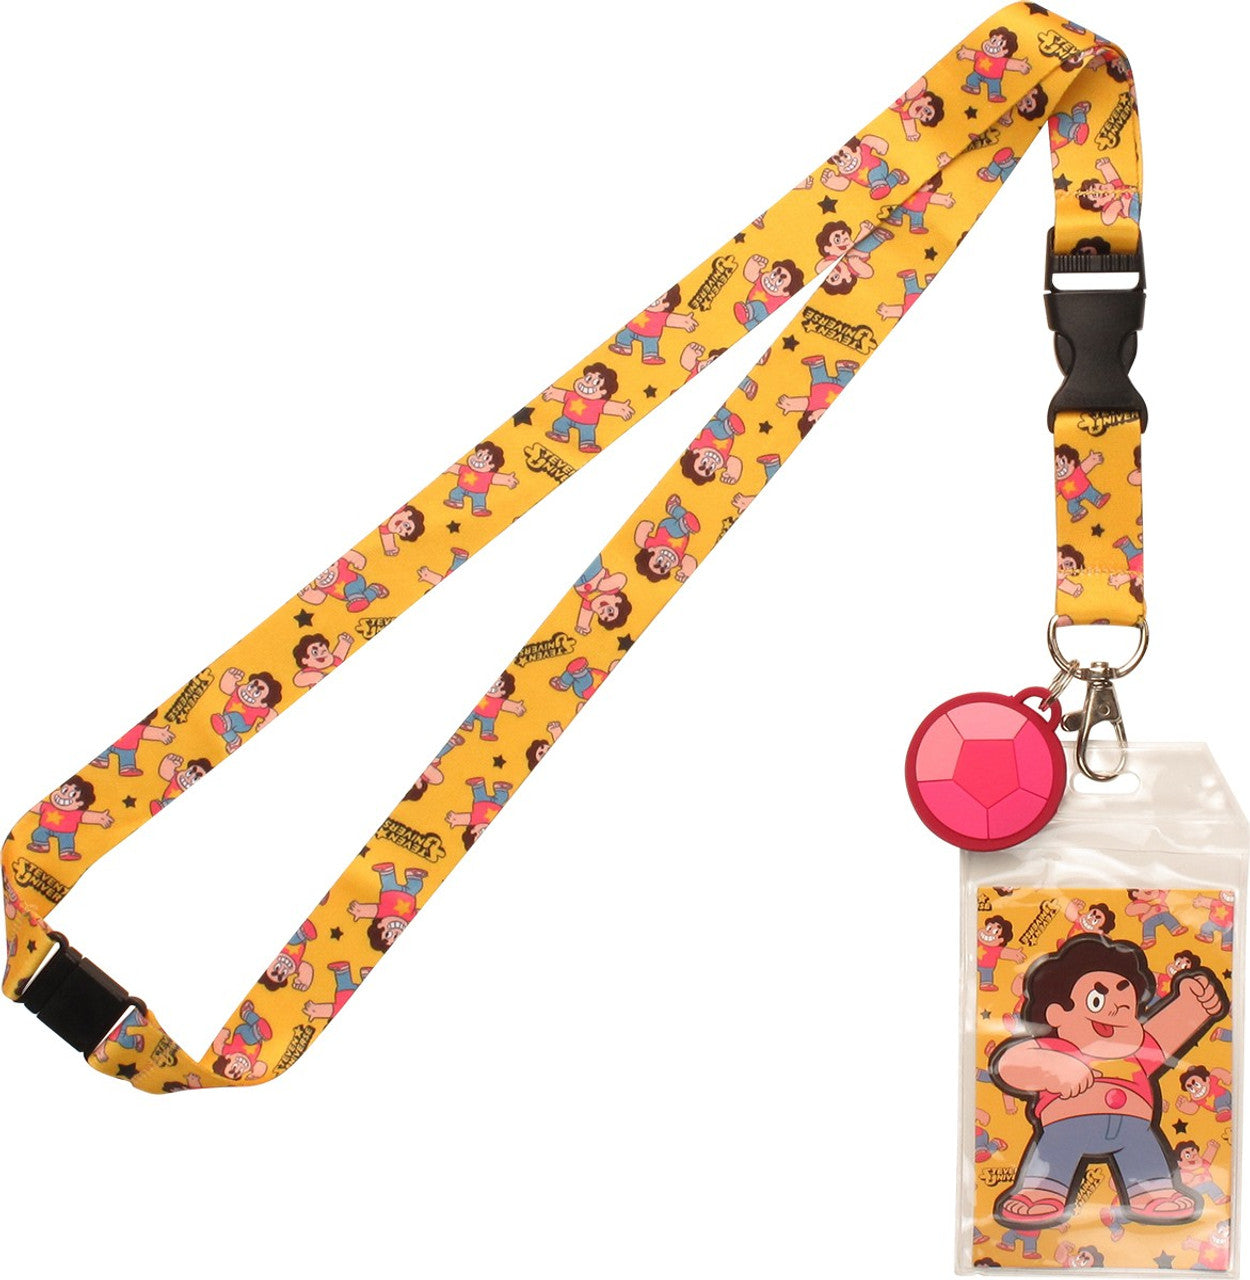 Steven Universe Limited Edition Collector's Lanyard